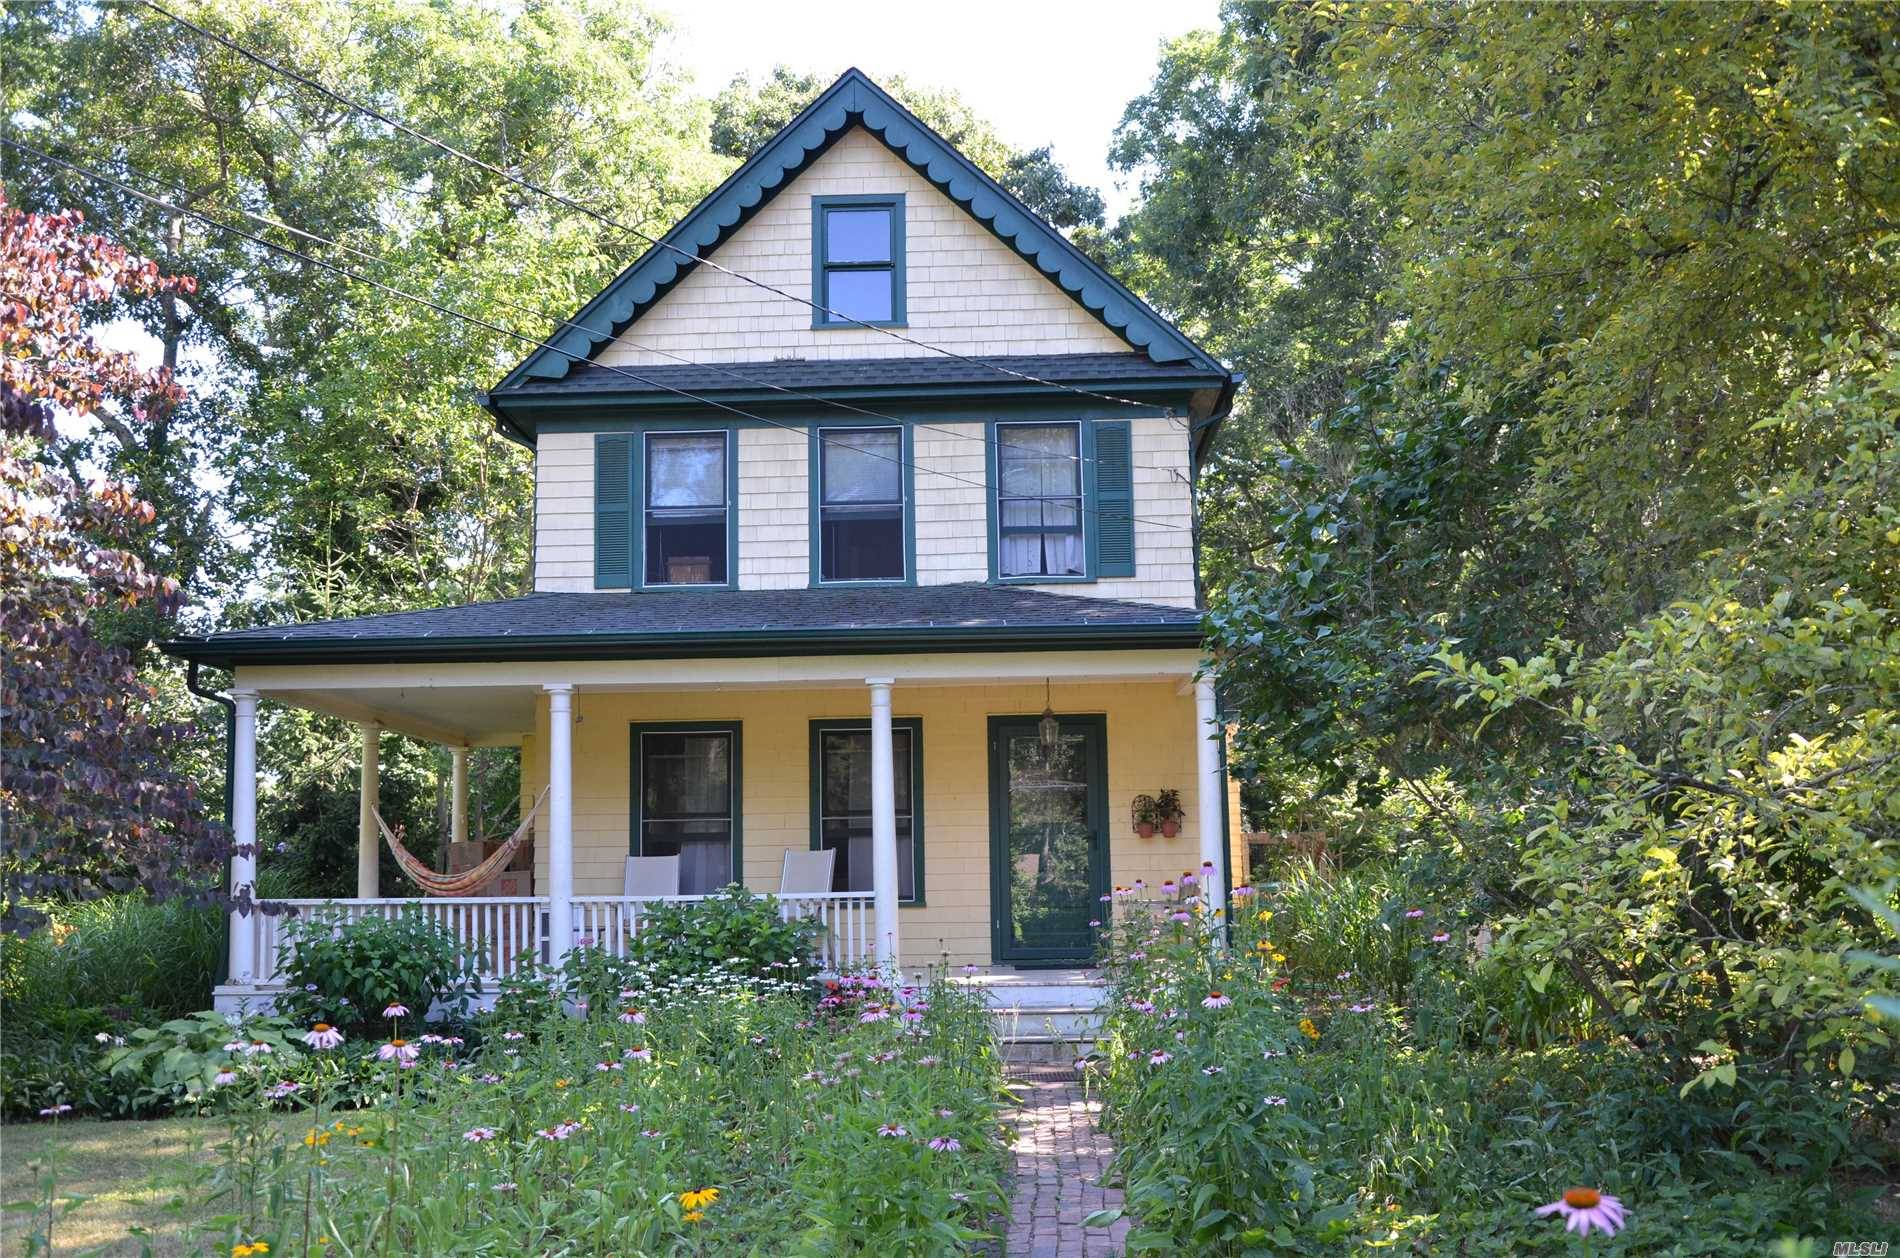 Step In To A Piece Of North Fork History When You Enter This Charming 3 Bedroom, 1.